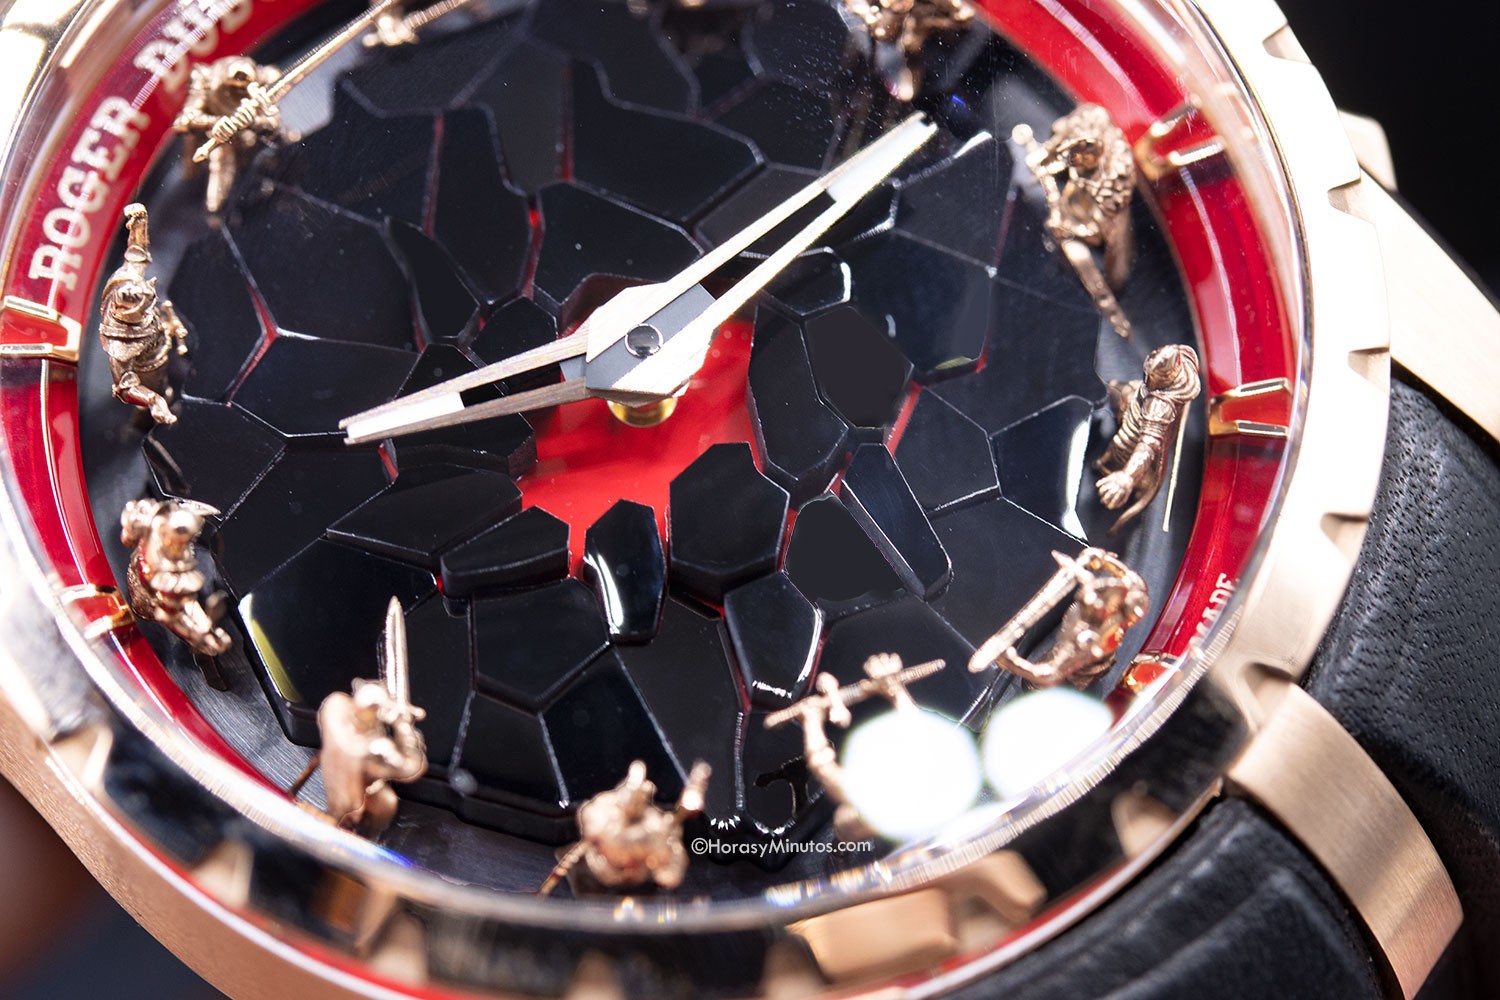 cristales centrales de Murano del Roger Dubuis Excalibur Knights of the Round Table